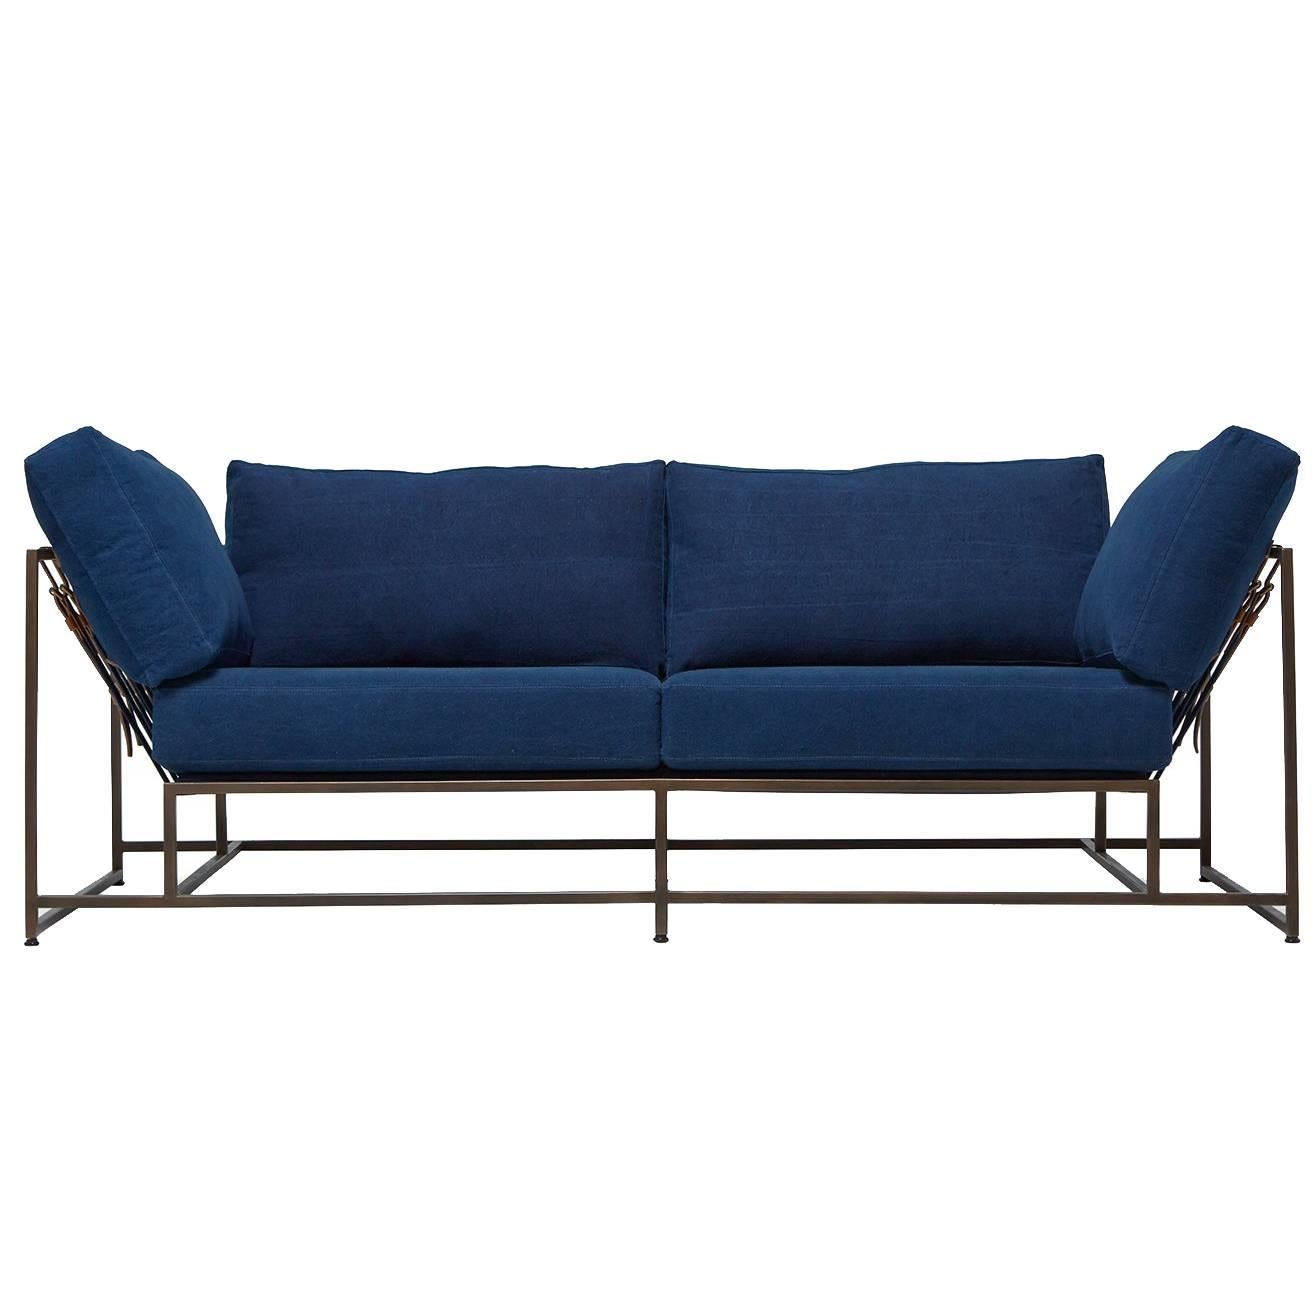 Hand-Dyed Indigo Canvas and Antique Copper Two-Seat Sofa